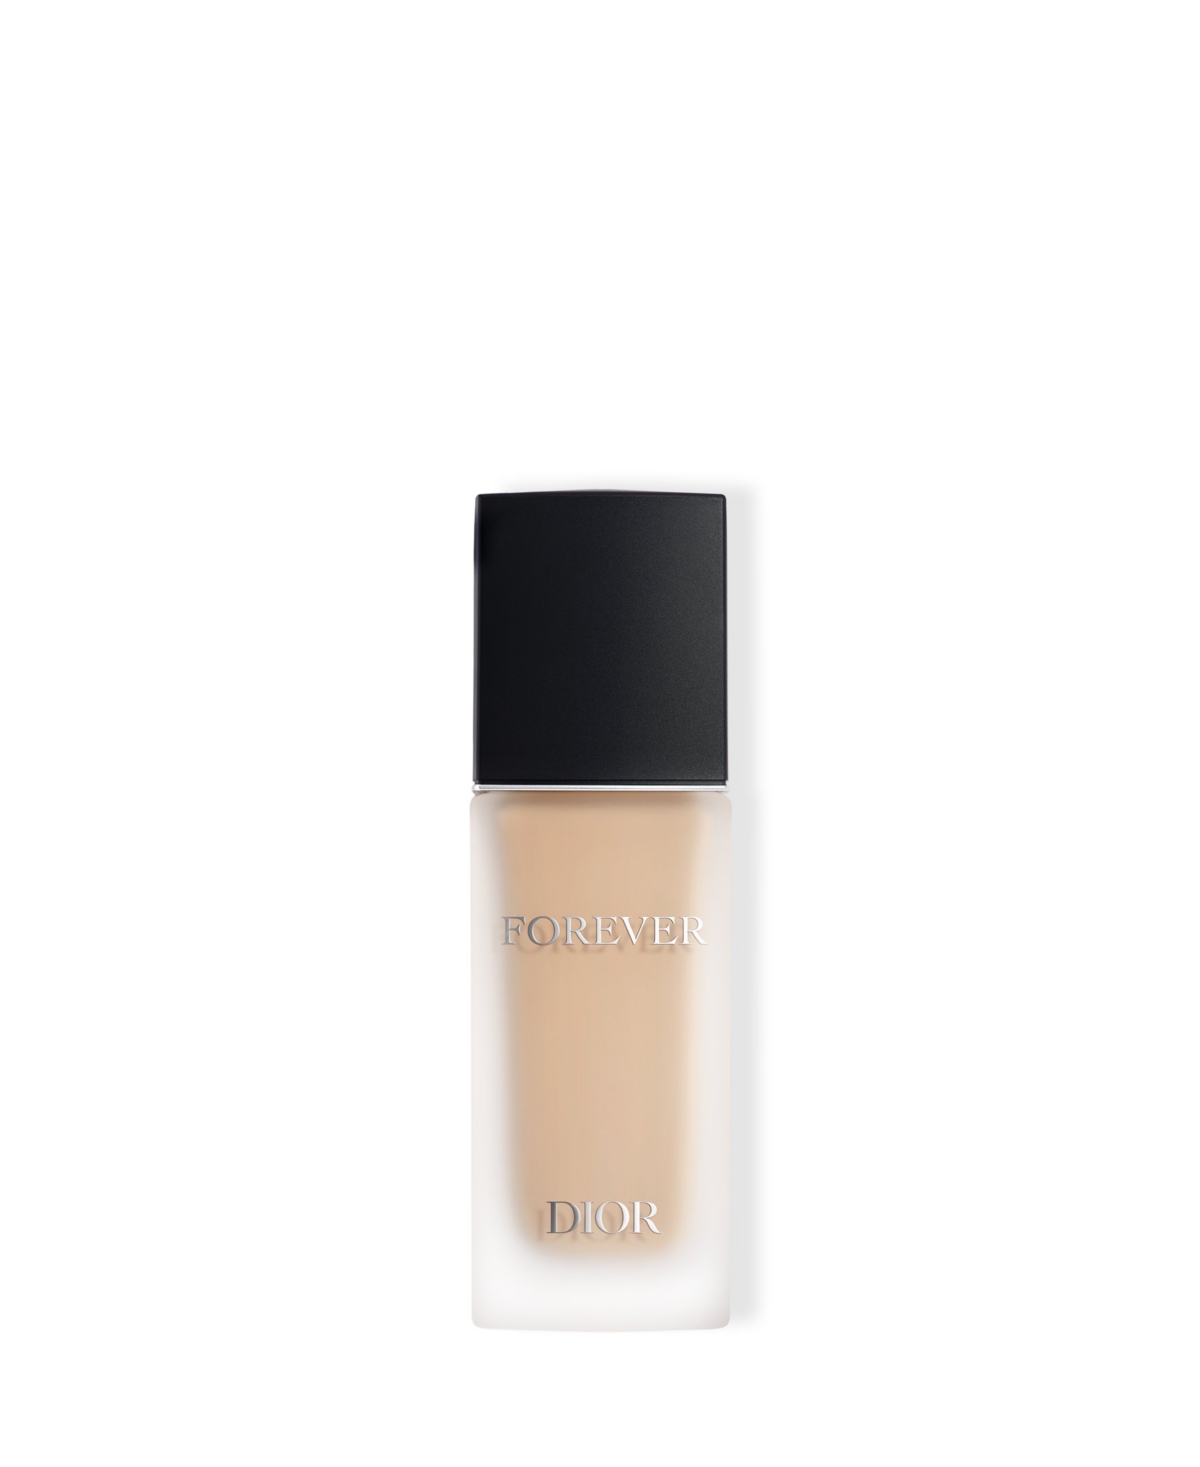 Dior Forever Matte Skincare Foundation Spf 15 In Warm (fair Skin With Warm Tones)